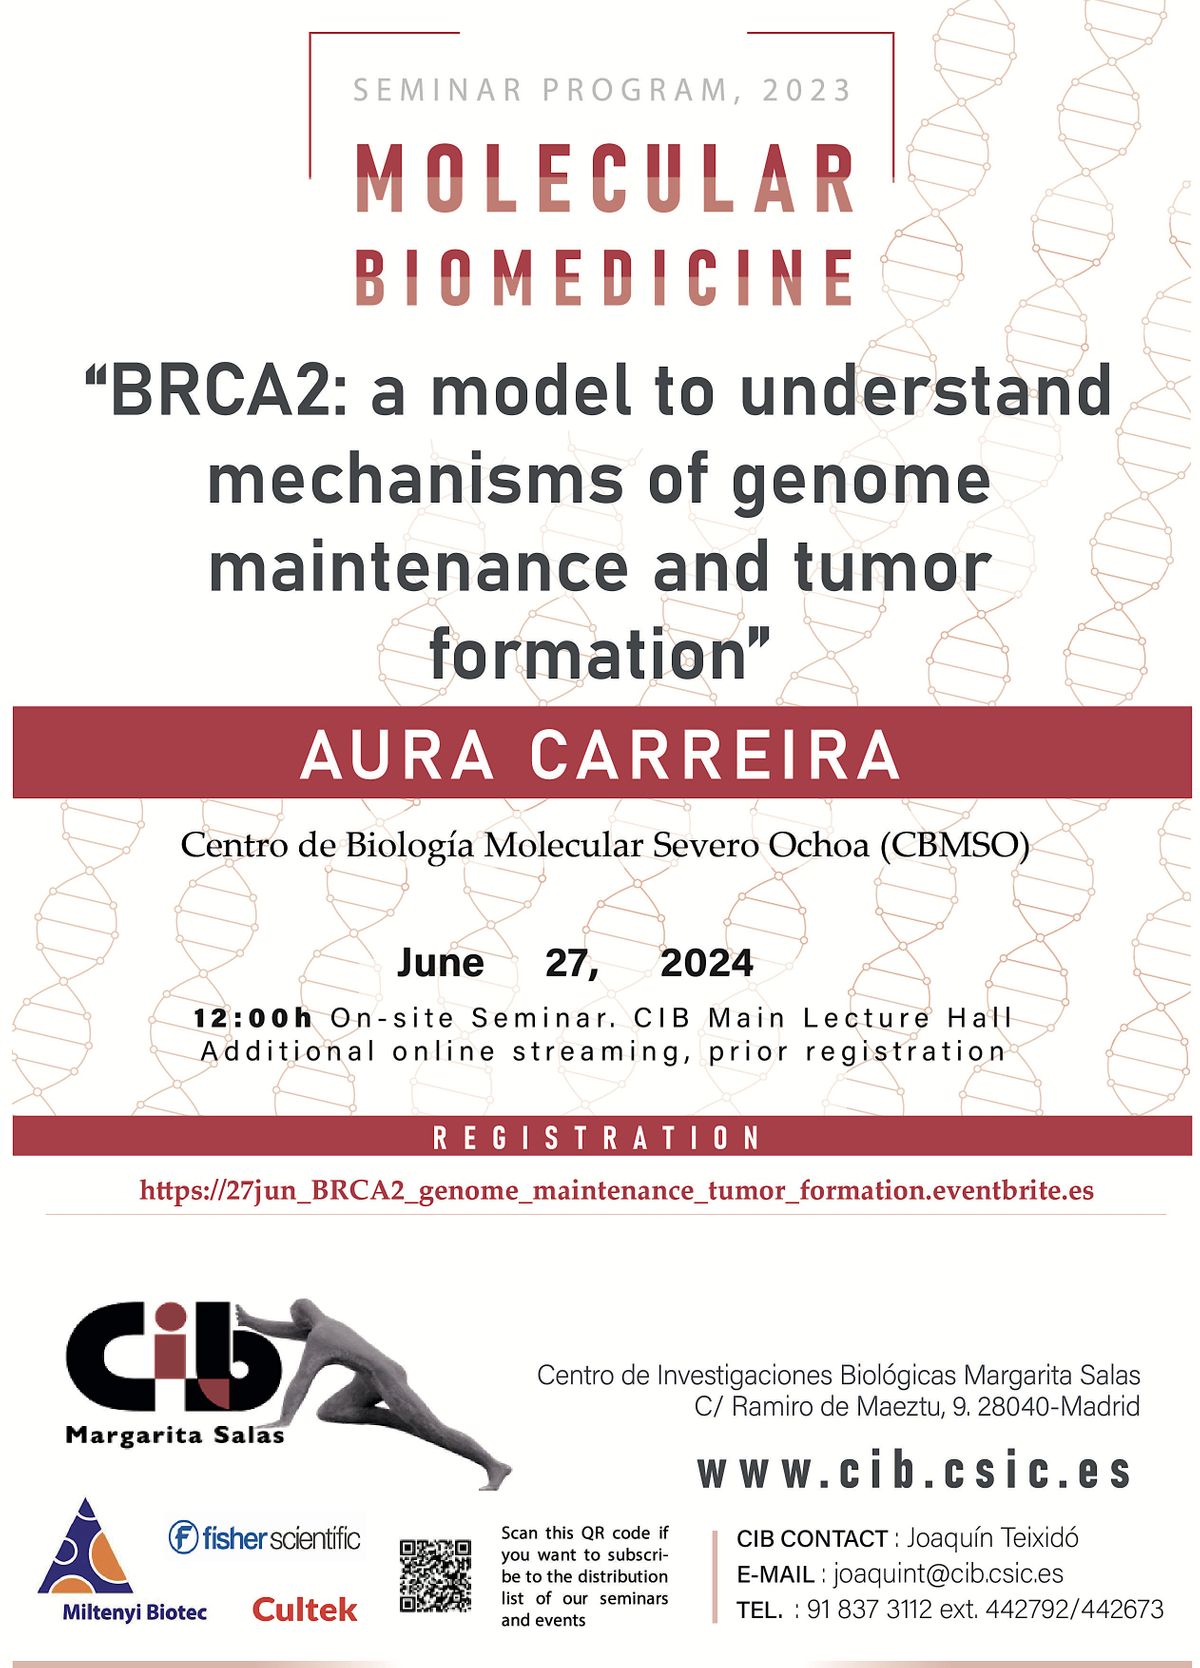 BRCA2: model to understand genome maintenance and tumor formation